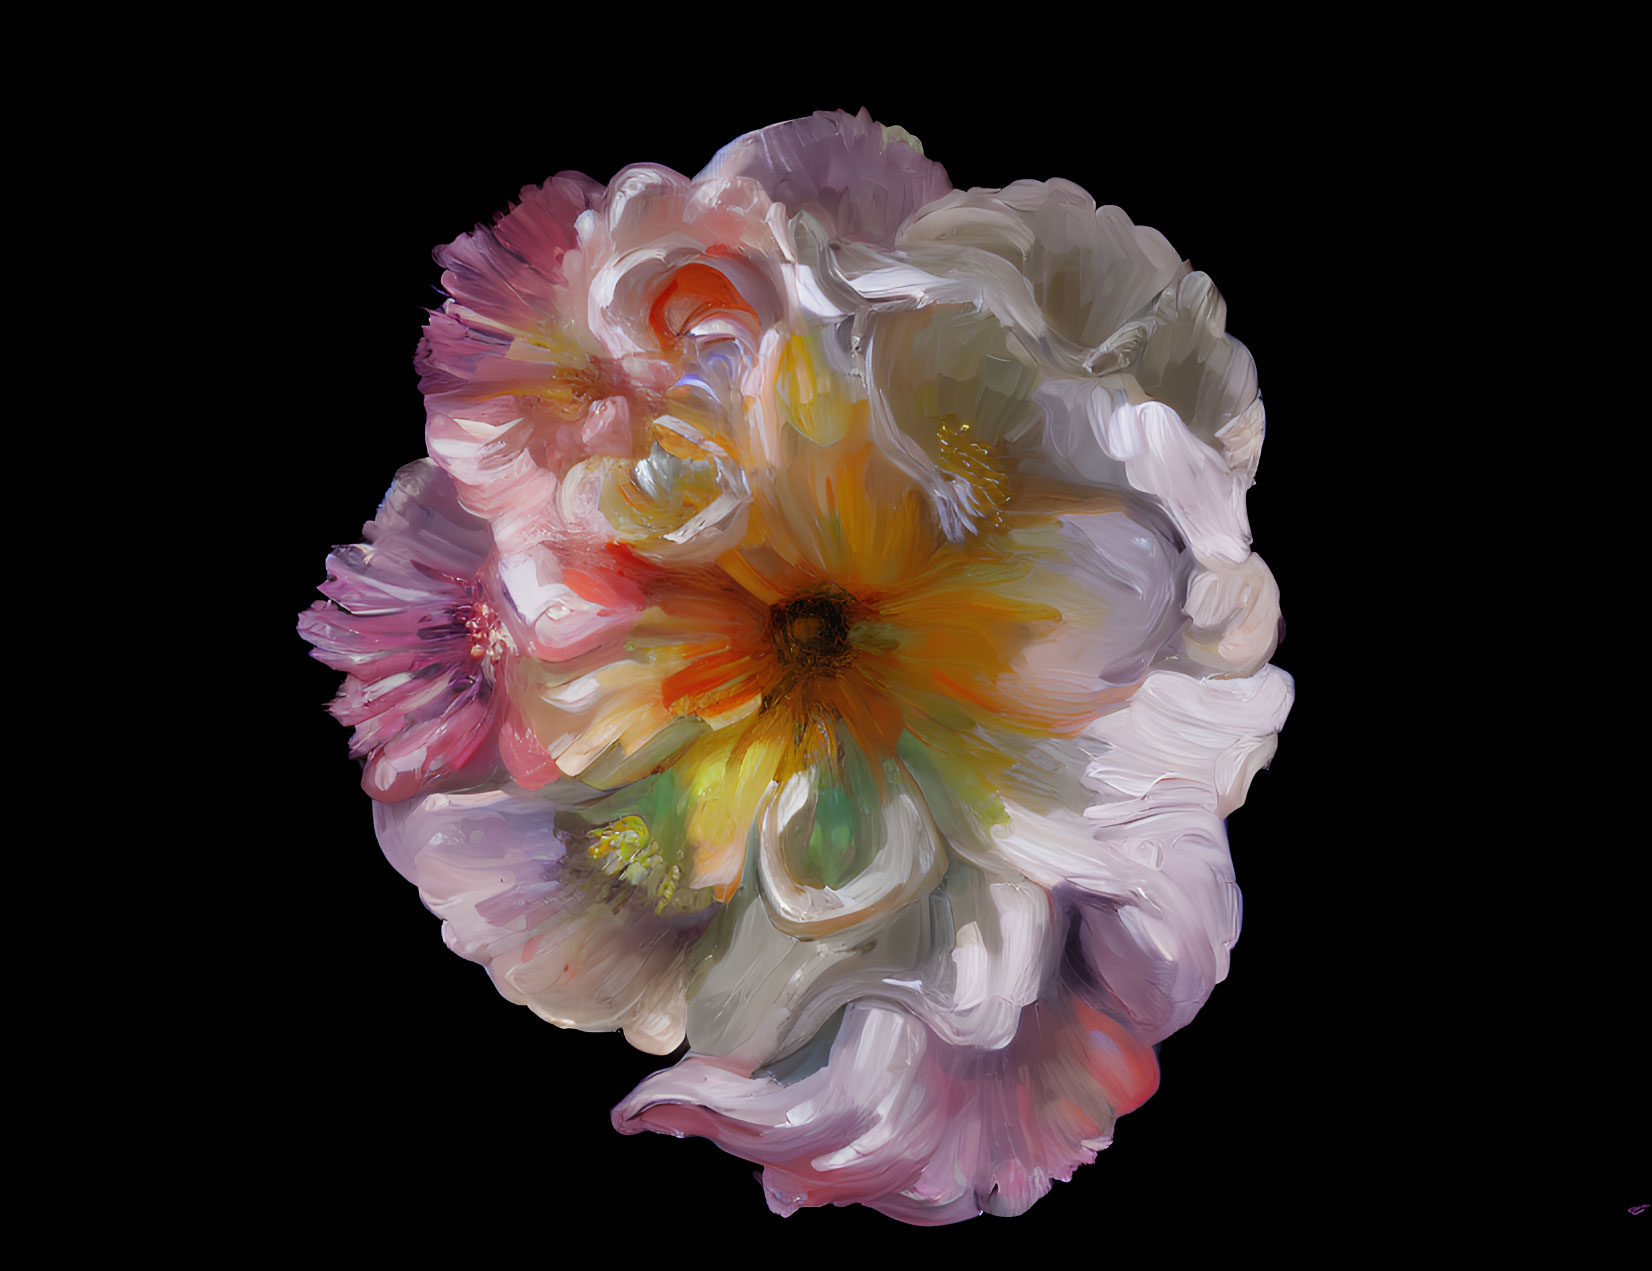 Colorful Flower Digital Painting with White, Pink, and Orange Petals